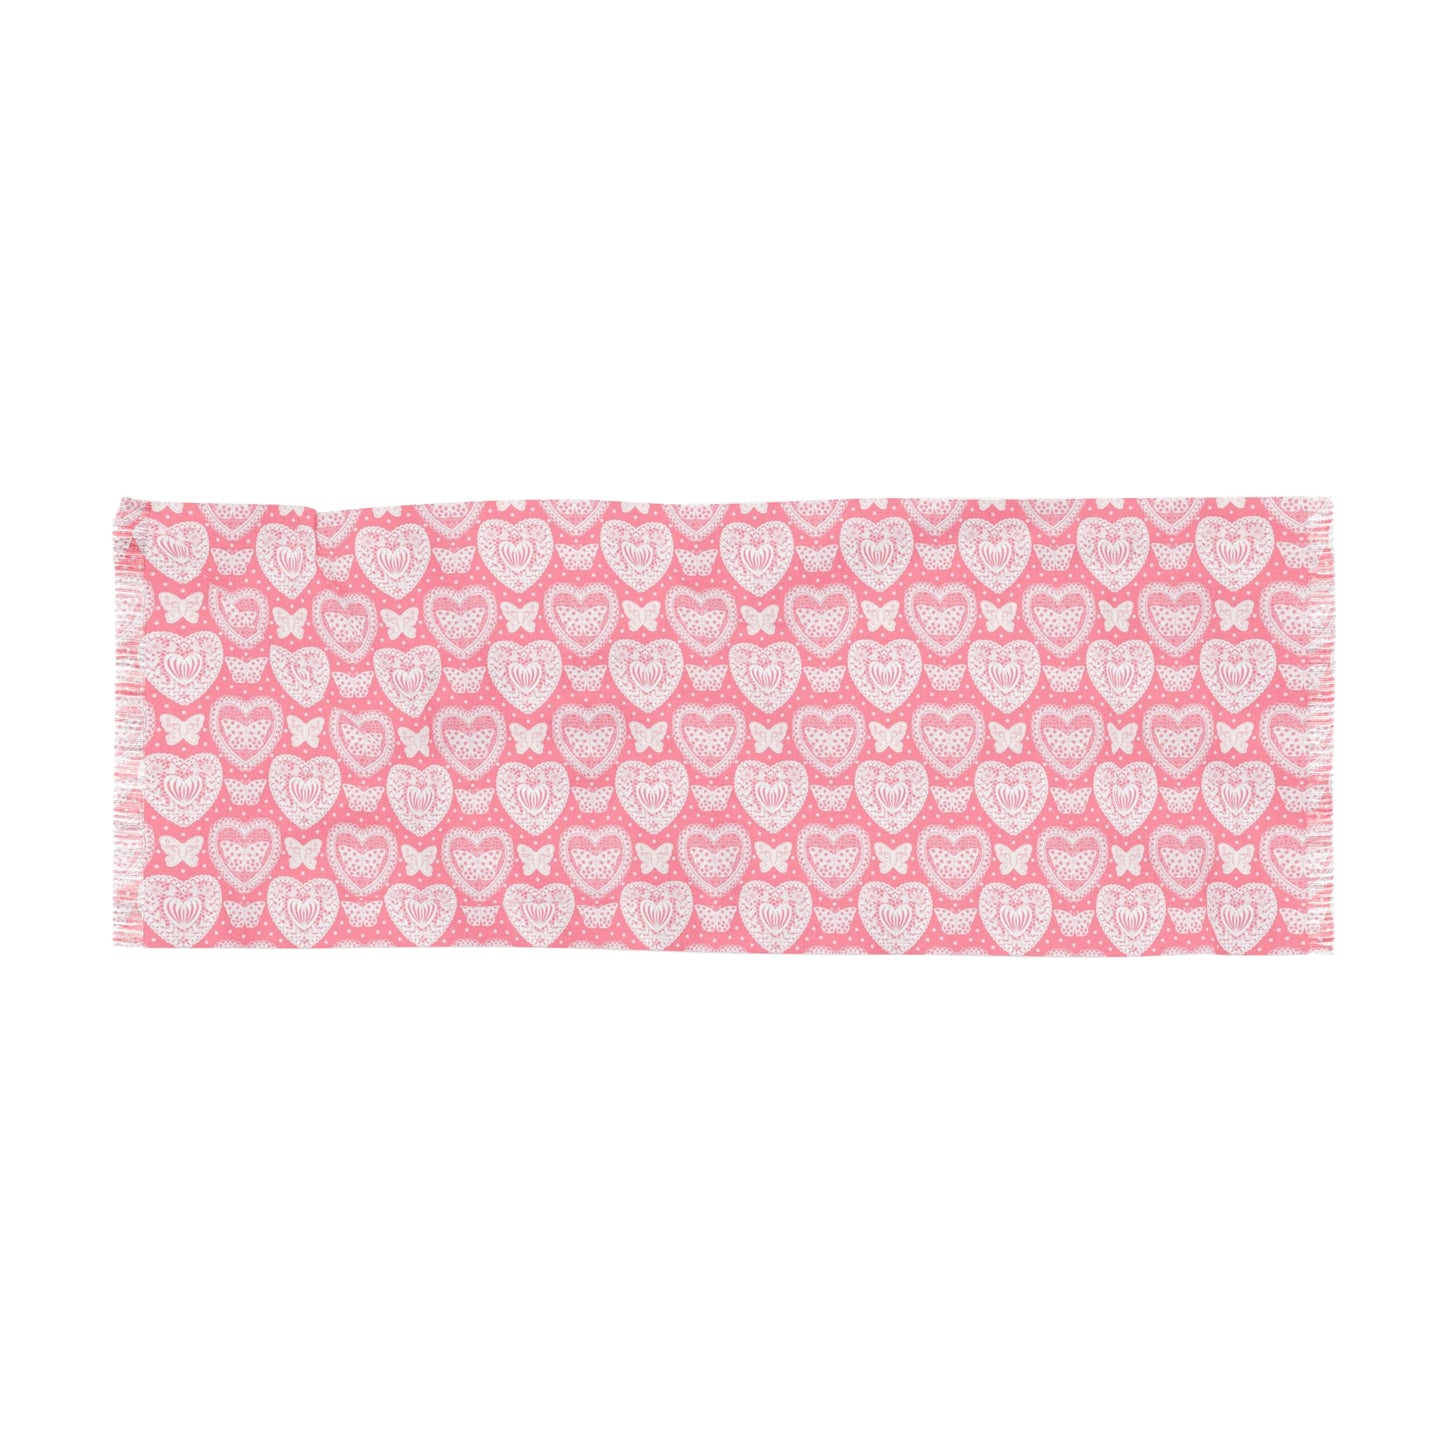 Paper Hearts Light Scarf